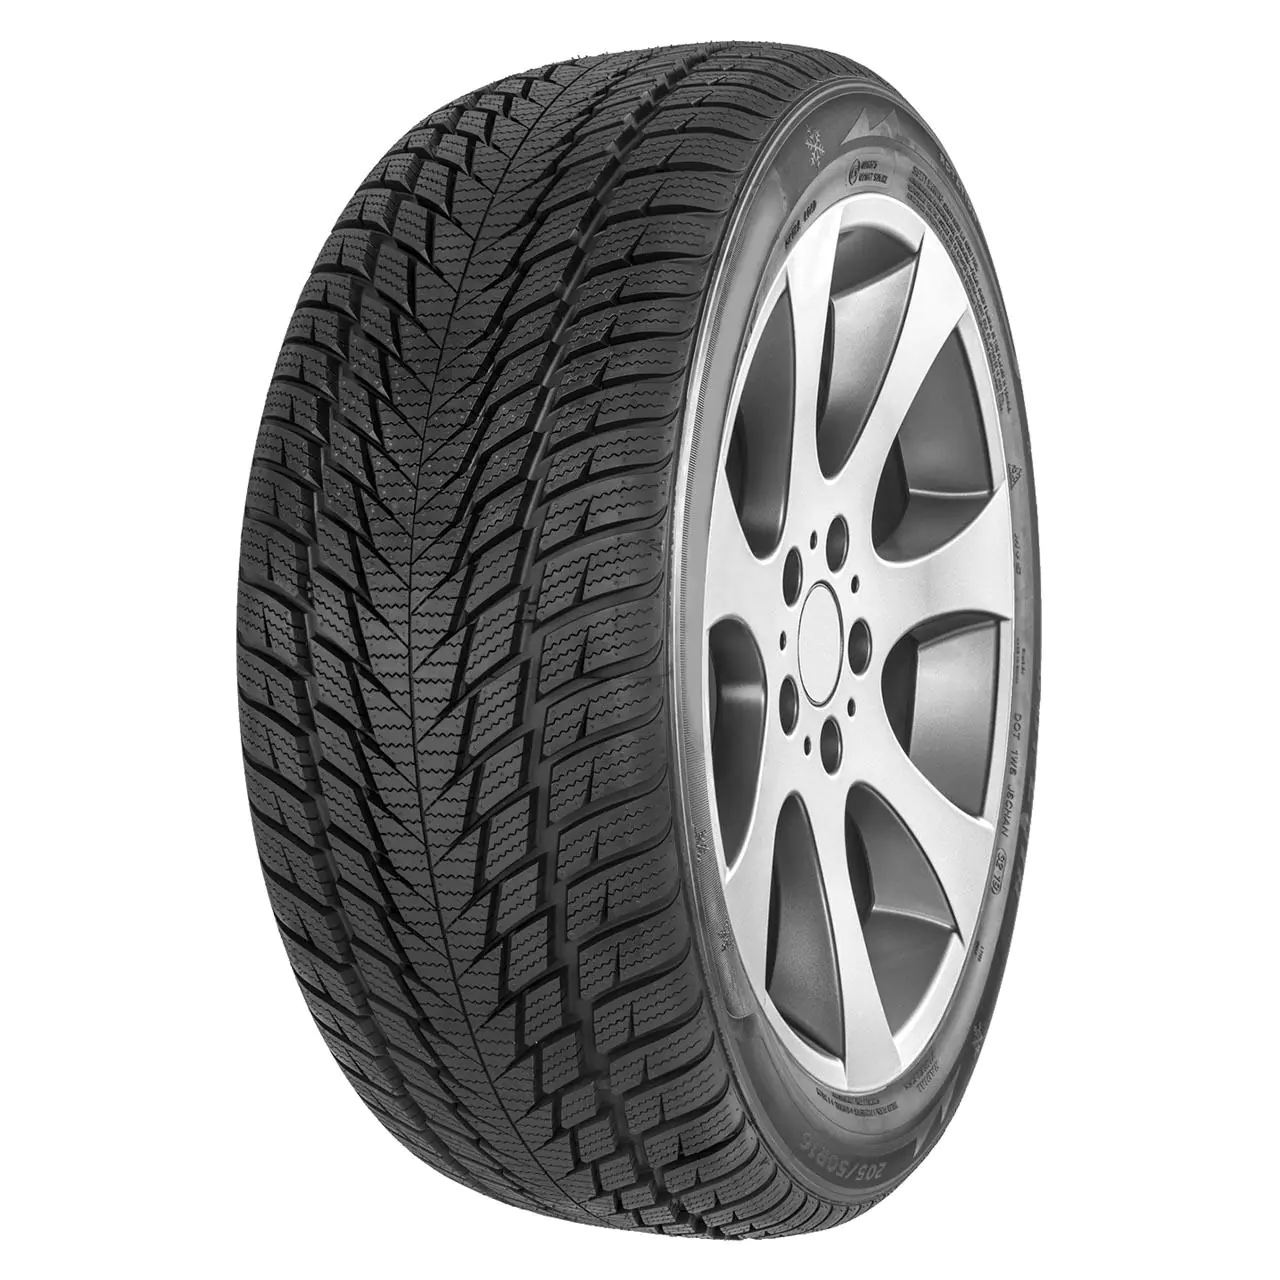 Gomme Autovettura Fortuna 235/40 R19 96V GOWIN UHP3 XL M+S Invernale